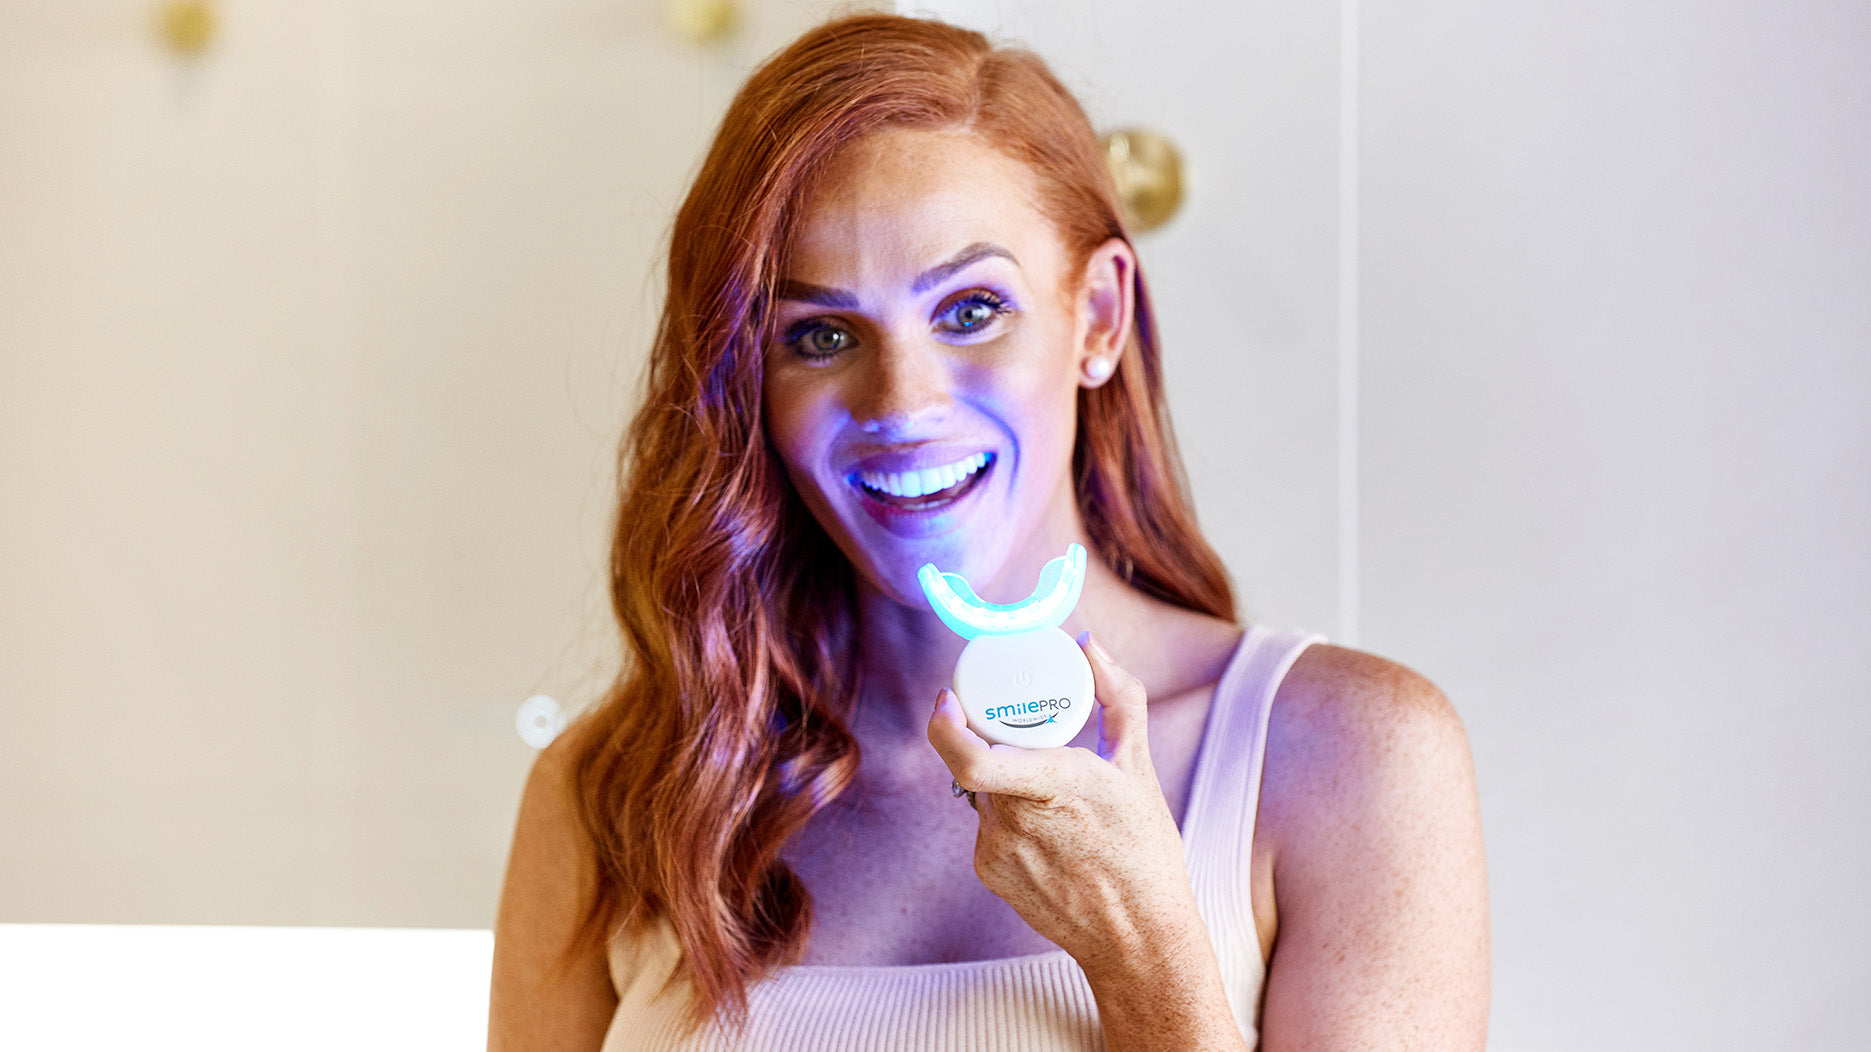 Affordable home teeth whitening kits and natural toothpaste by SmilePro.